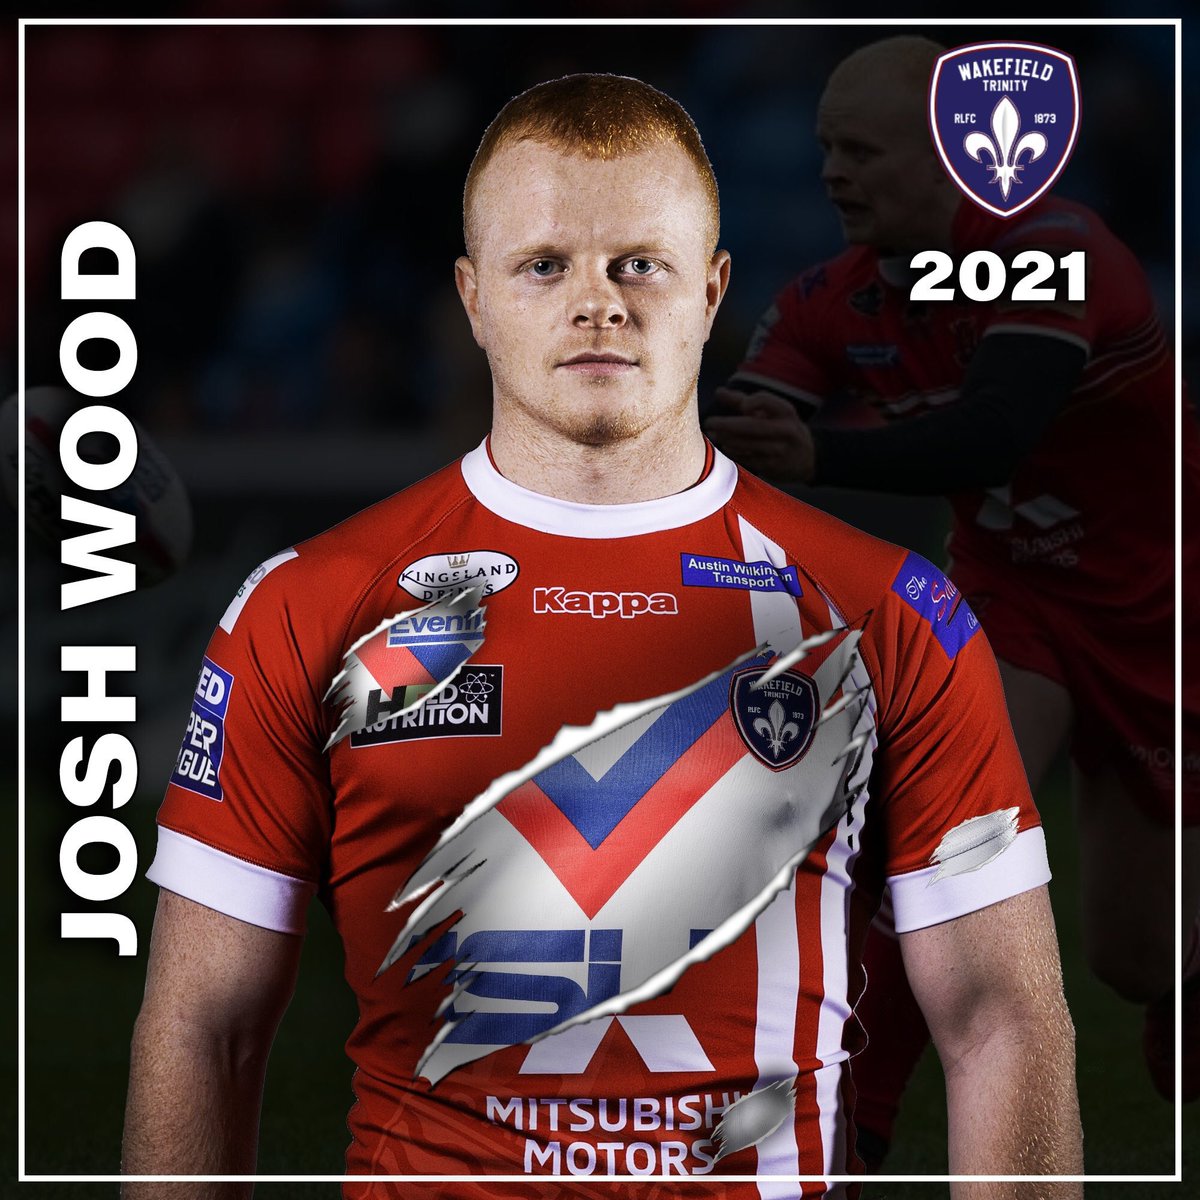 Wakefield Trinity on Twitter: "🙌 Another new signing now announced! Who's looking forward to seeing what @Josh19Wood can bring to the party 2020 and beyond?! 🤝 Great to have you